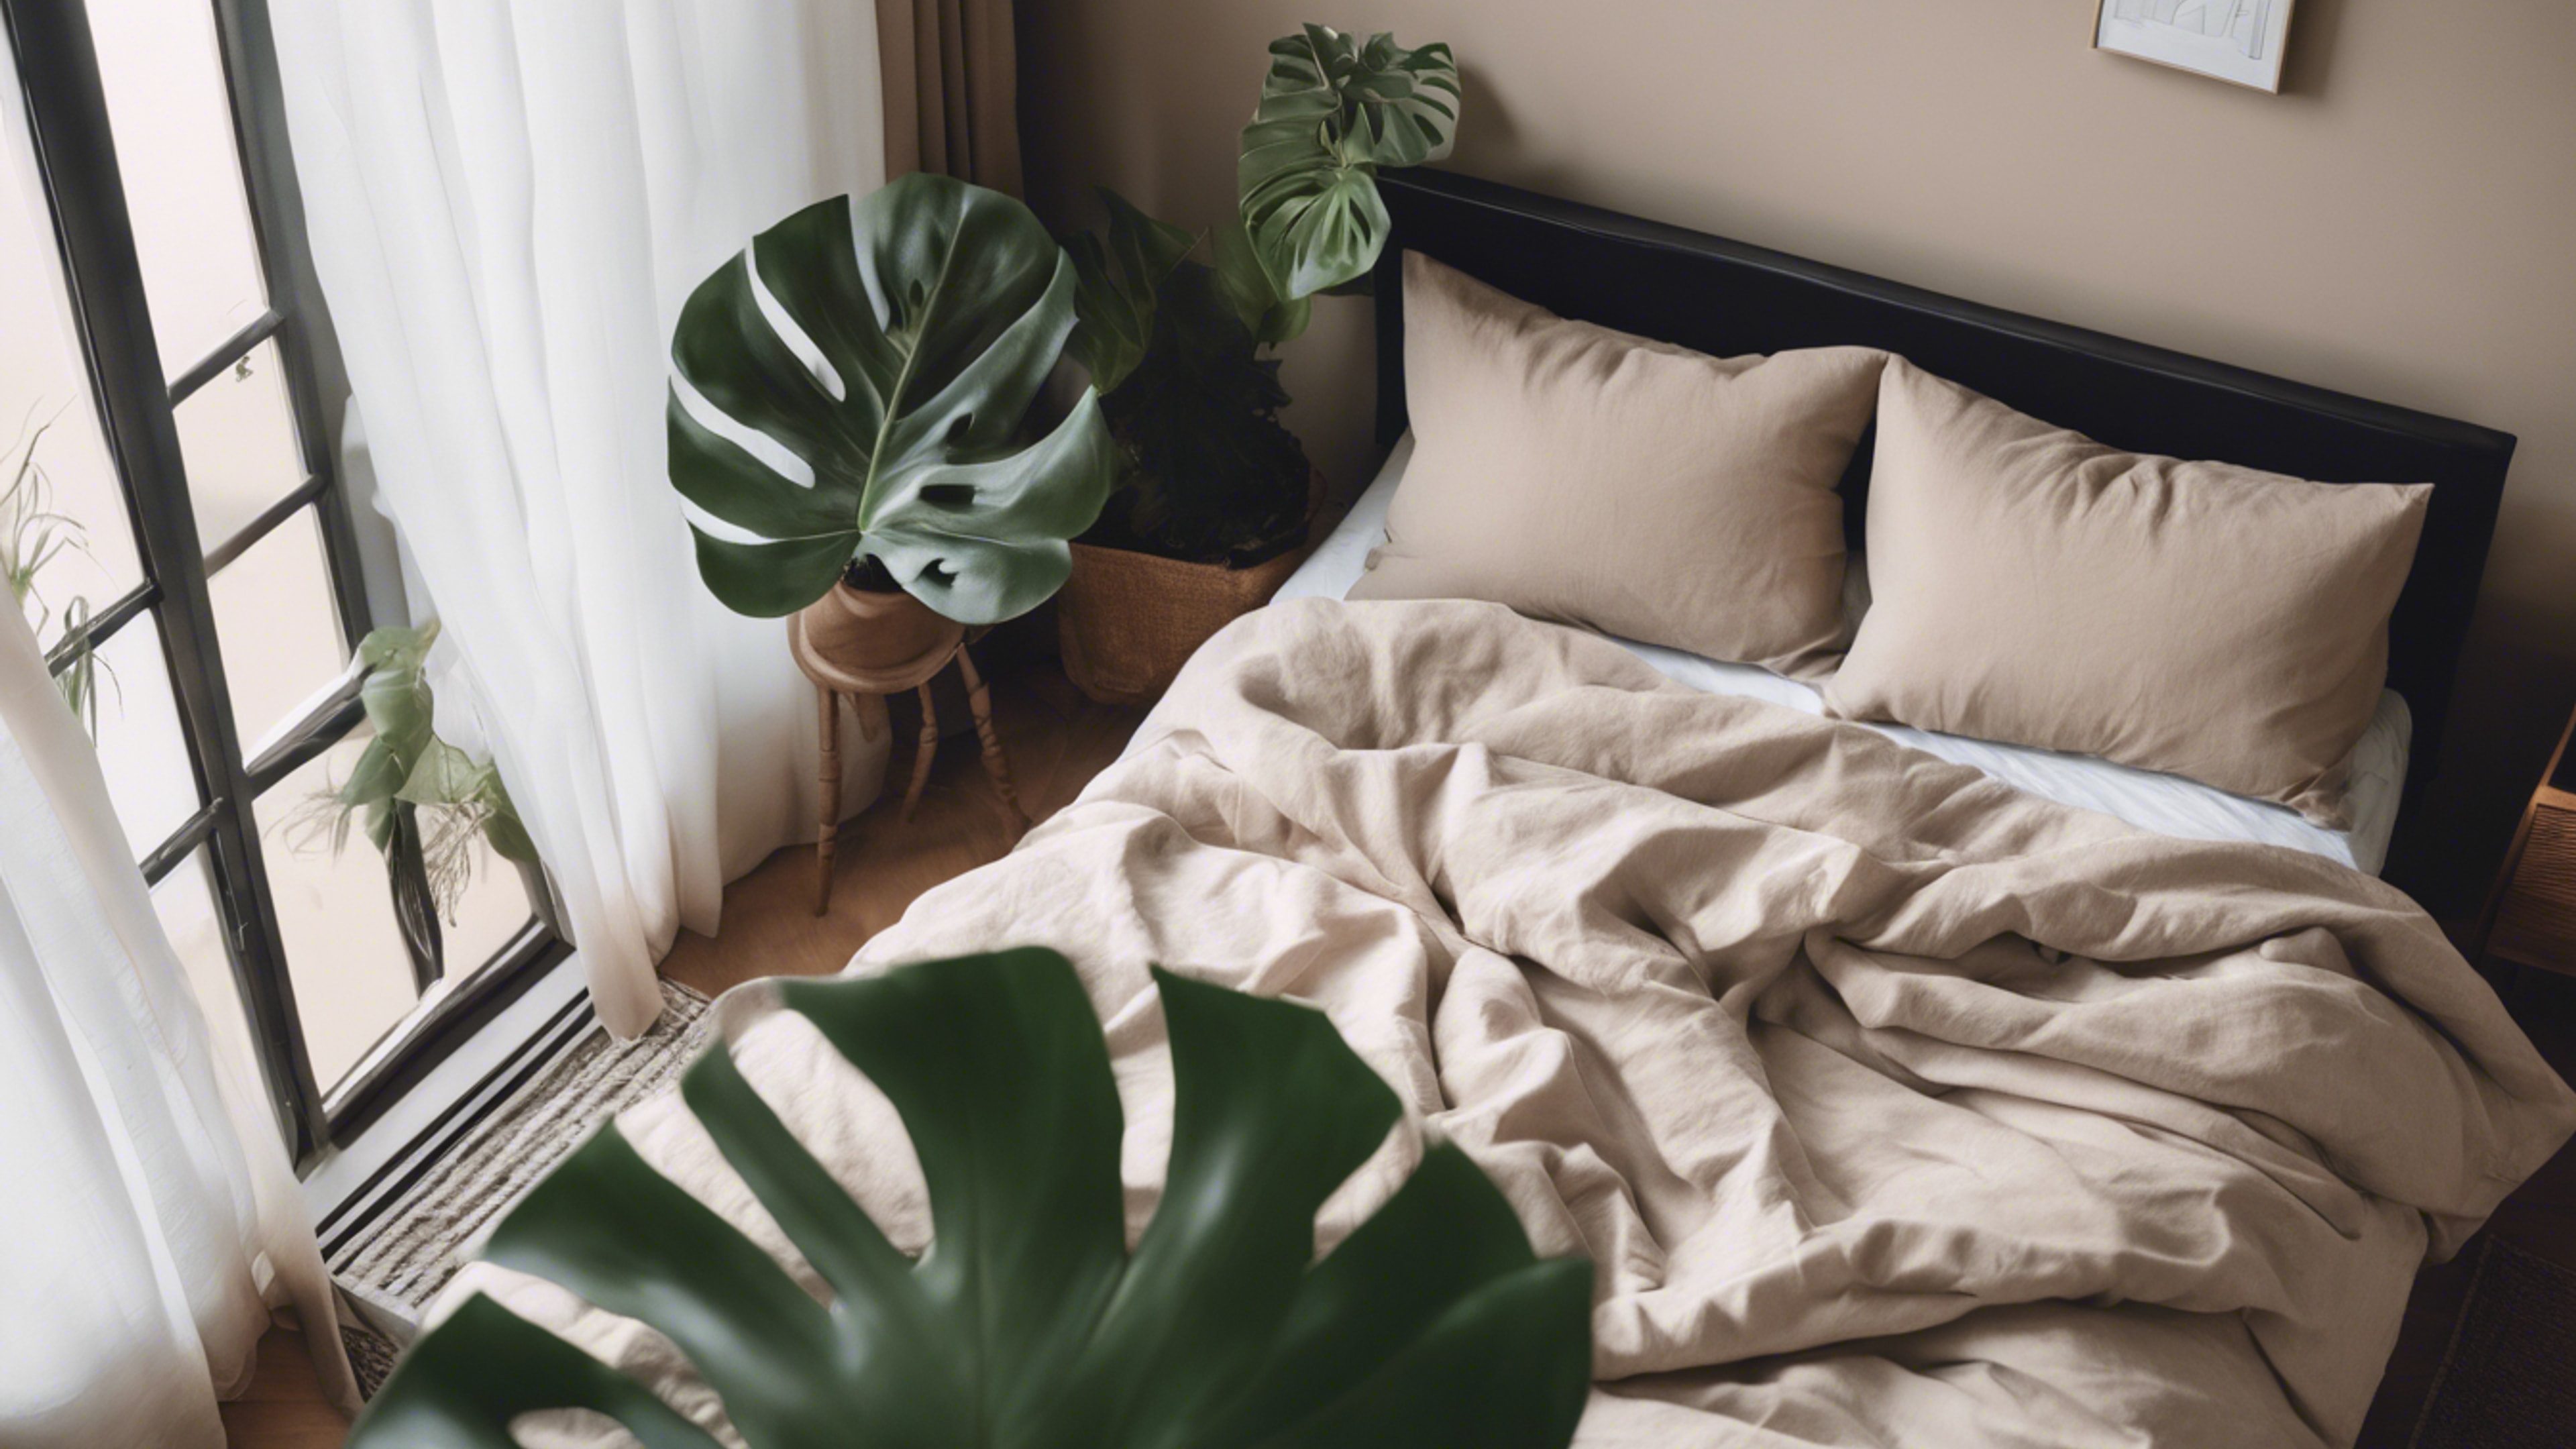 An overhead shot of a simple, cozy bedroom decorated with neutral linens and a single indoor monstera plant. Hintergrund[3343a08d4a5644ae8972]